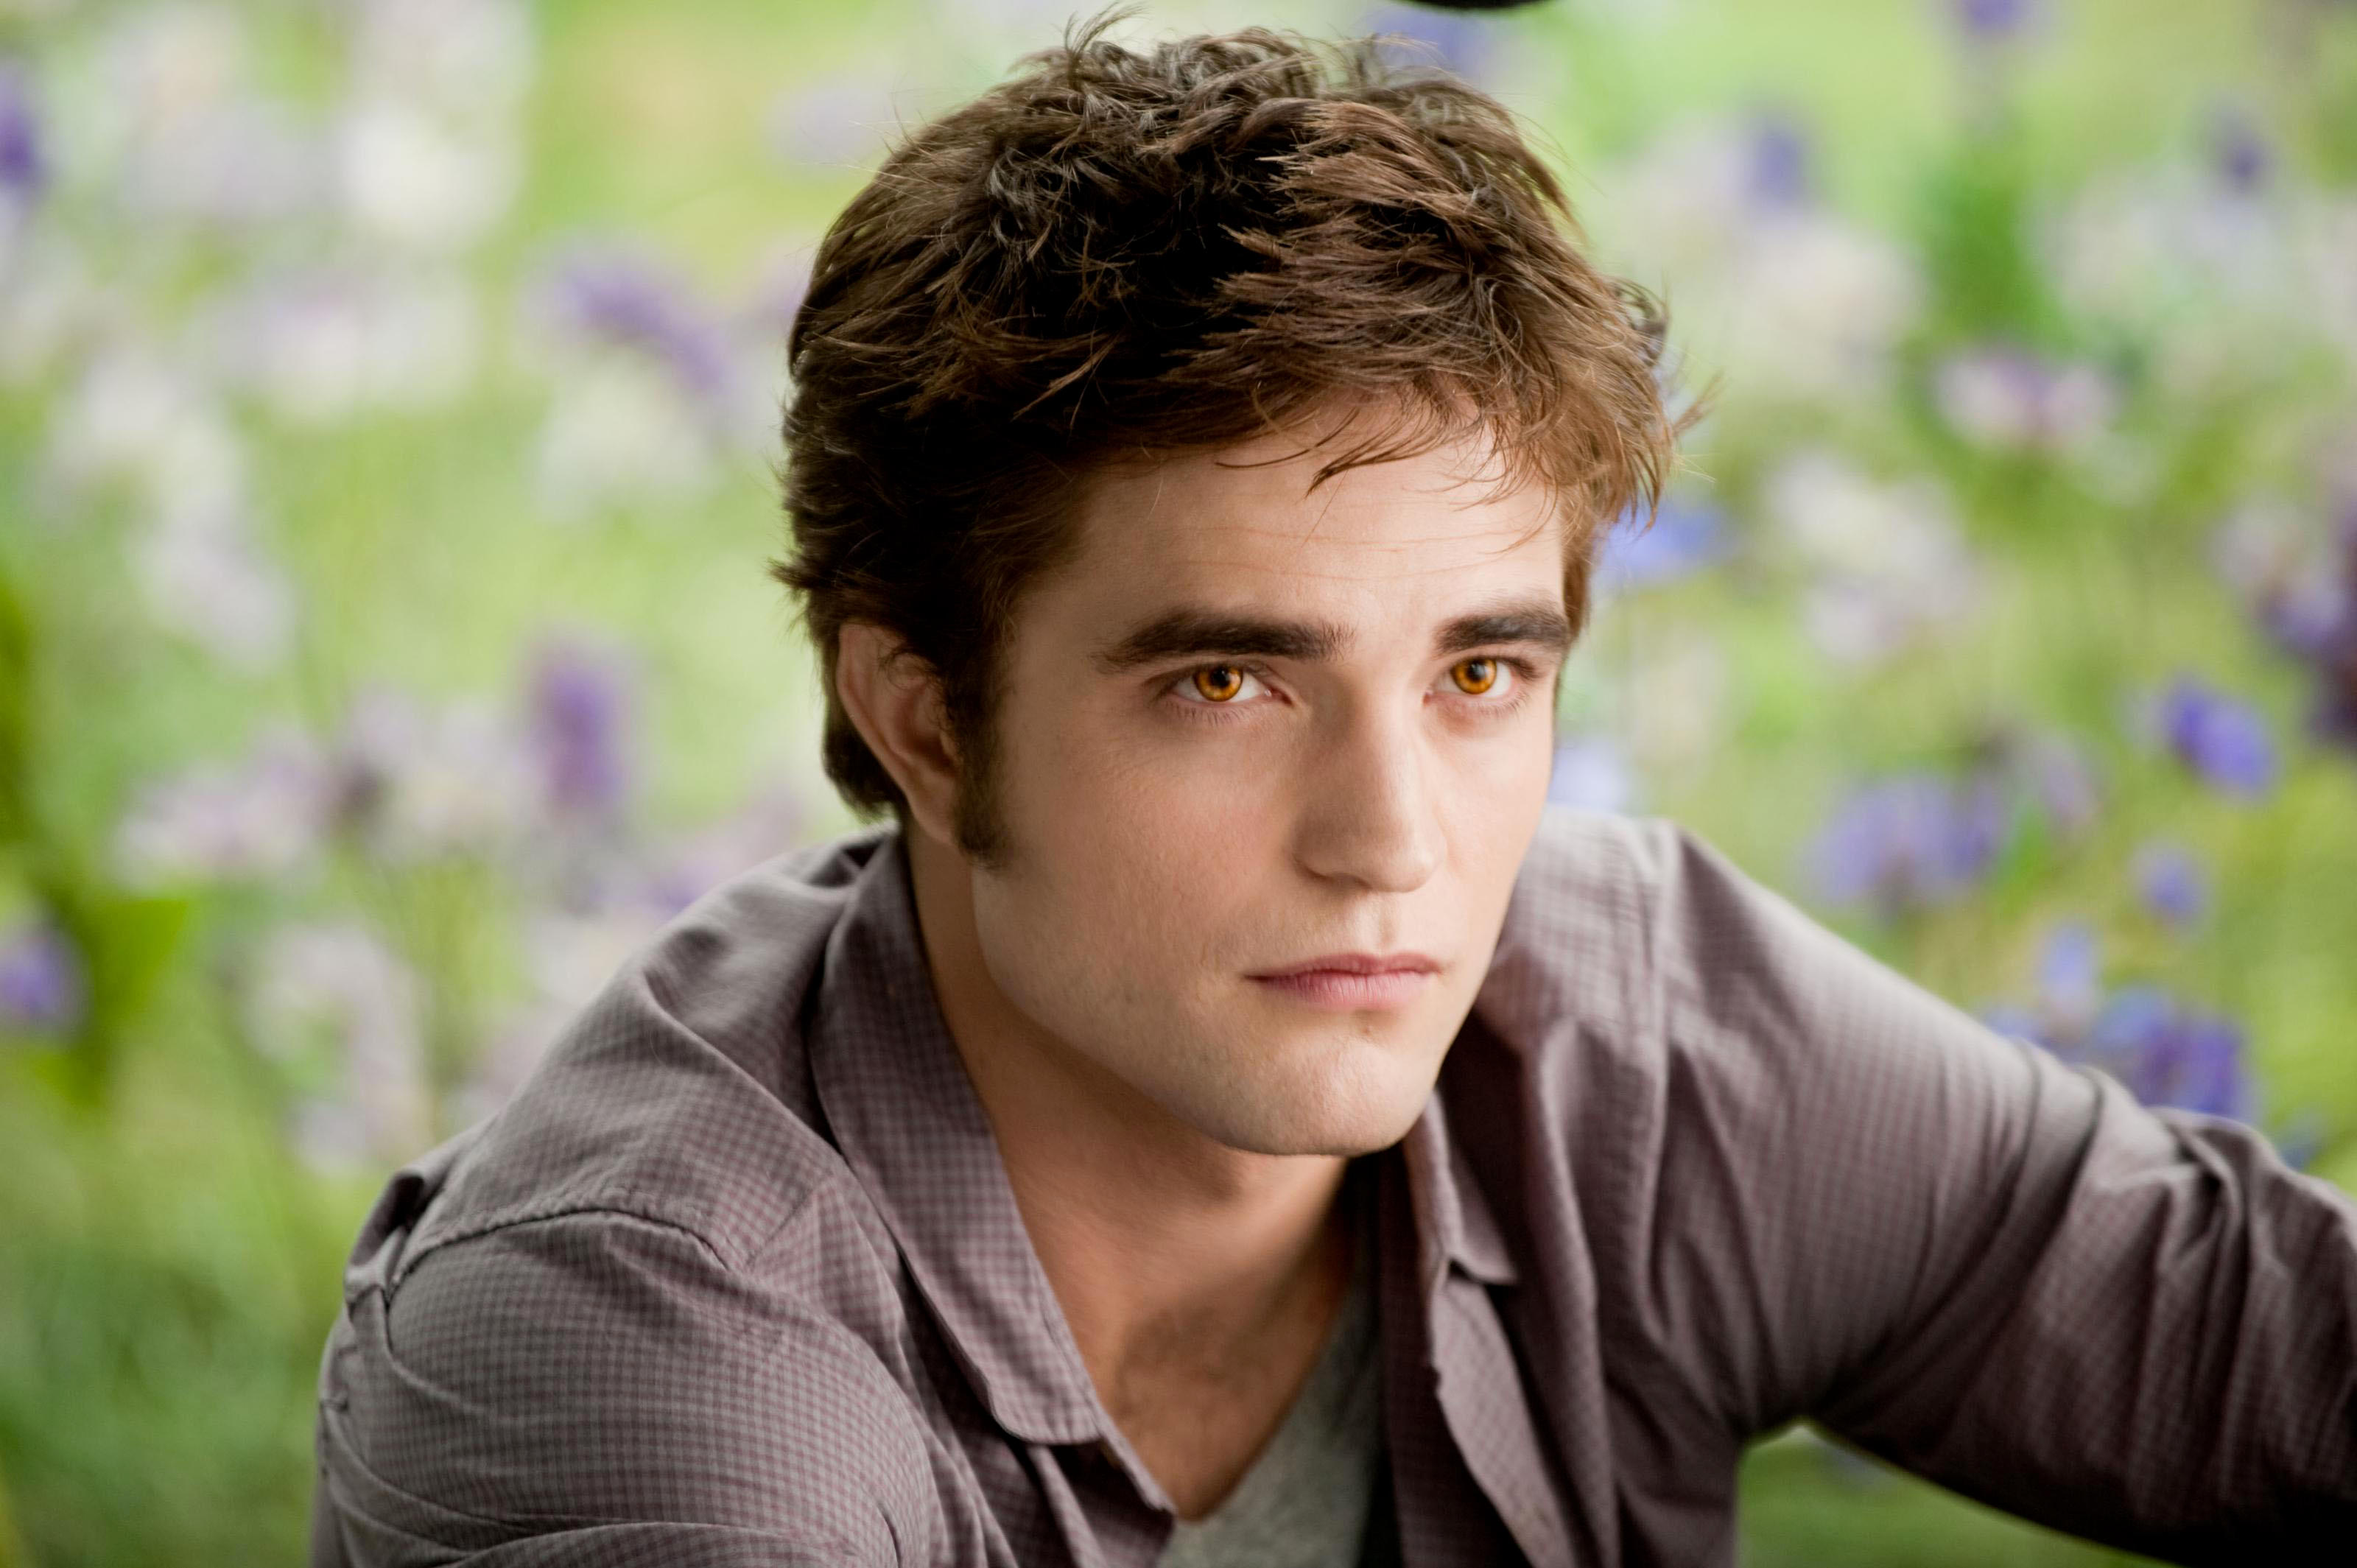 Wallpaper ID 630958  nature Robert Pattinson hairstyle The Twilight  Saga New Moon independence woodland land three quarter length forest  outdoors serious tree Edward Cullen free download